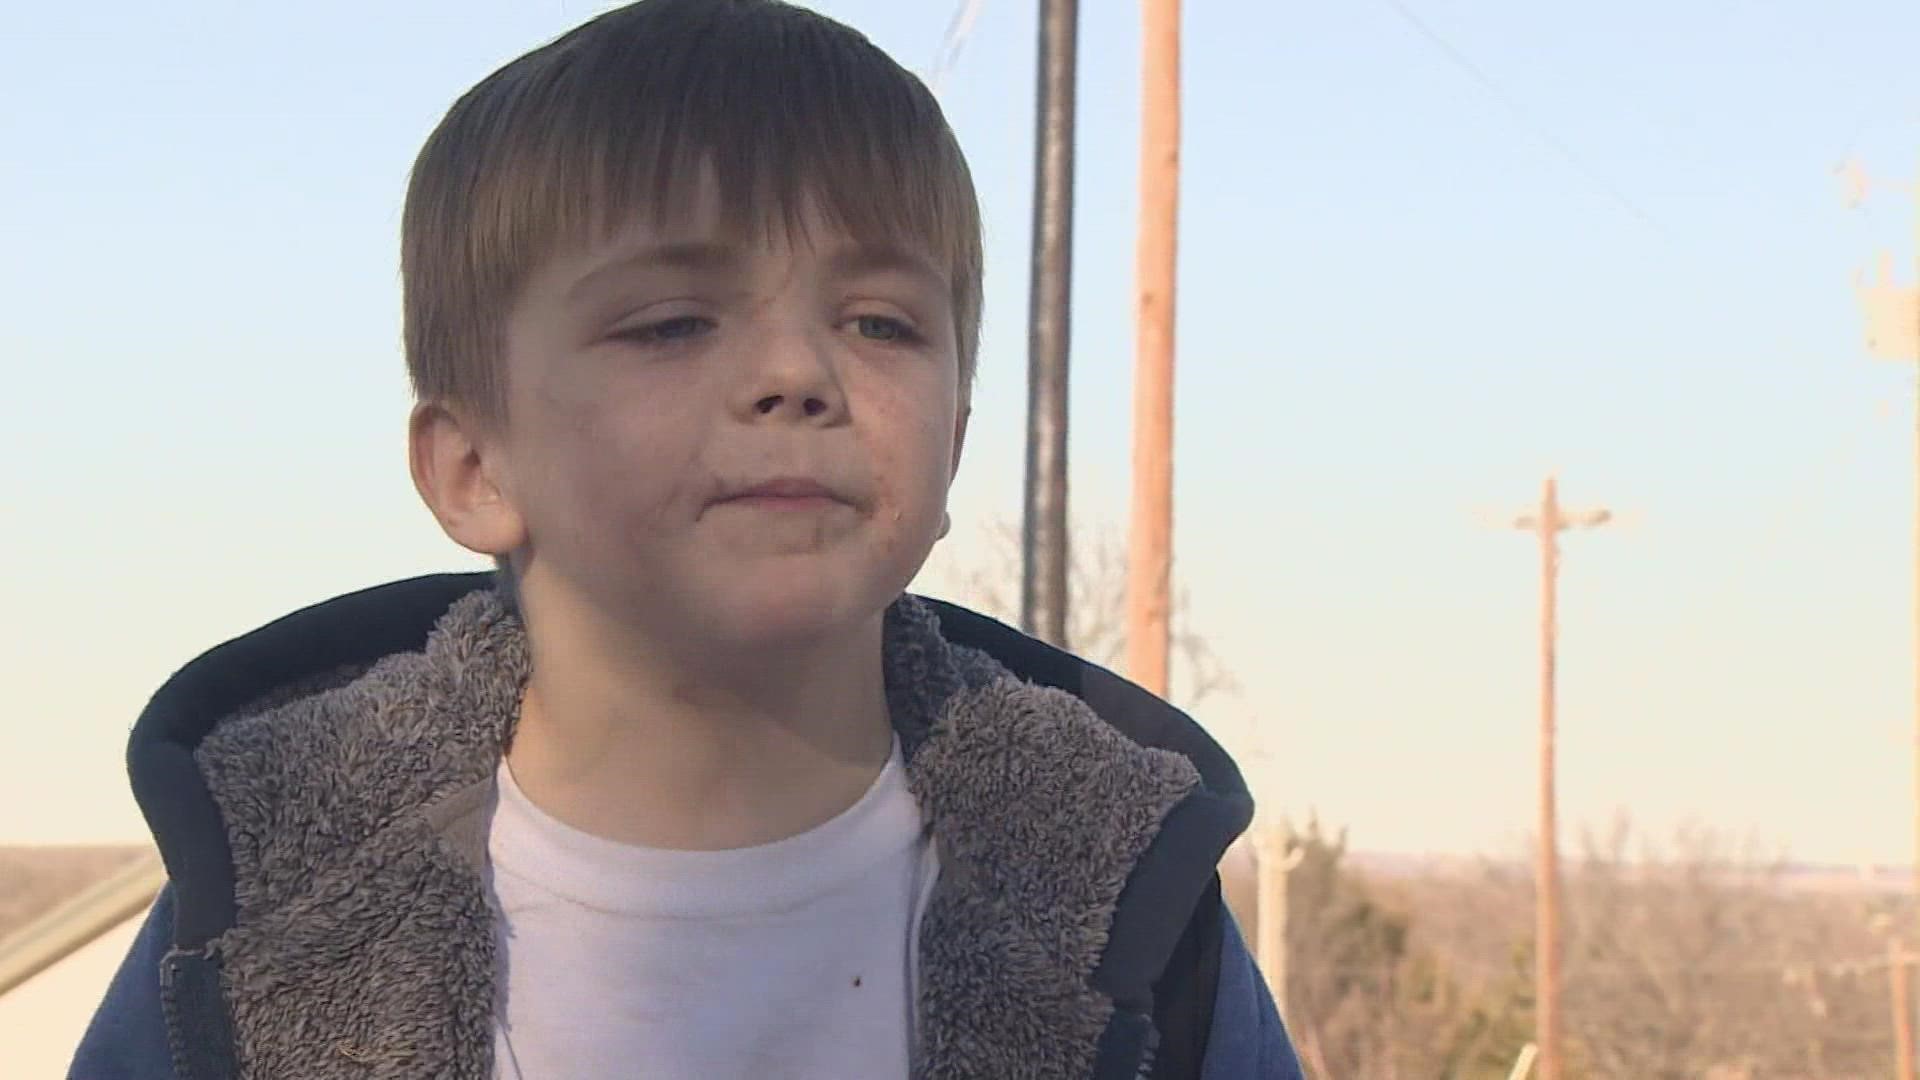 A Reno, Texas boy is recovering after being attacked by his neighbor's dog.